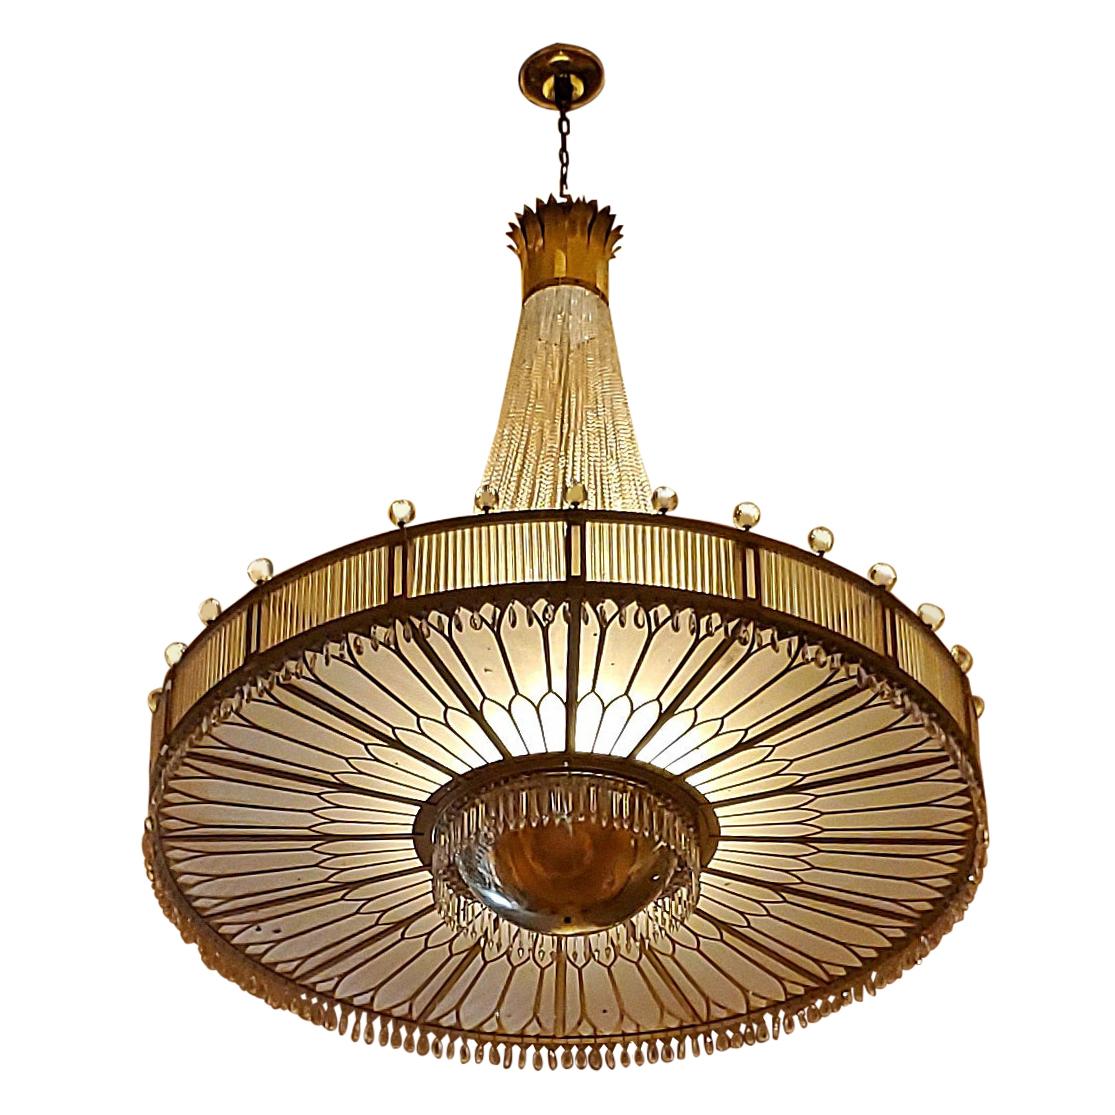 Monumental Midcentury Art Deco Style Ballroom Chandelier with Provenance For Sale